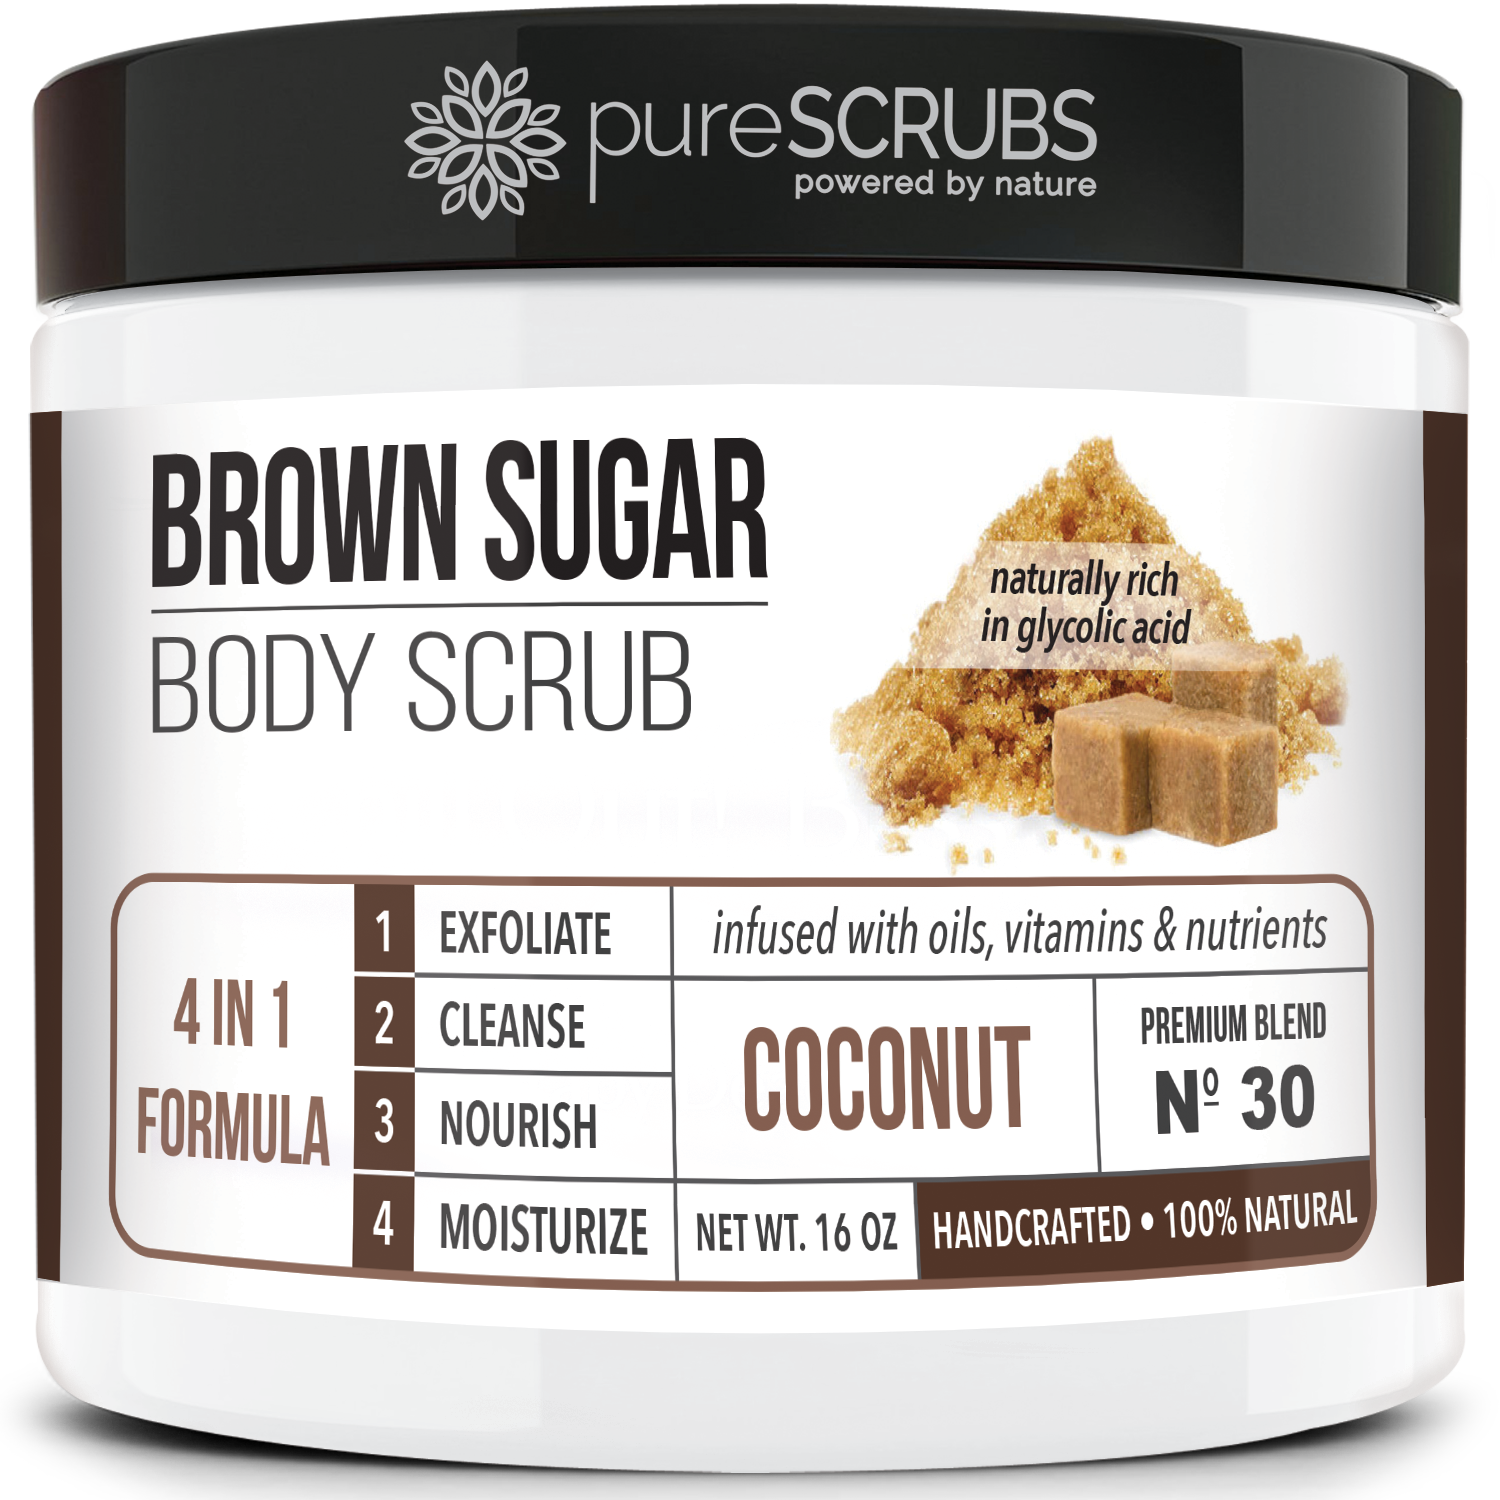 purescrubs coconut brown sugar body scrub Premium Blend #30 to exfoliate your skin comes with free loofah pad free exfoliating organic oatmeal bar soap shea butter and honey and free eco-friendly bamboo spoon to stir and scoop out the scrub 